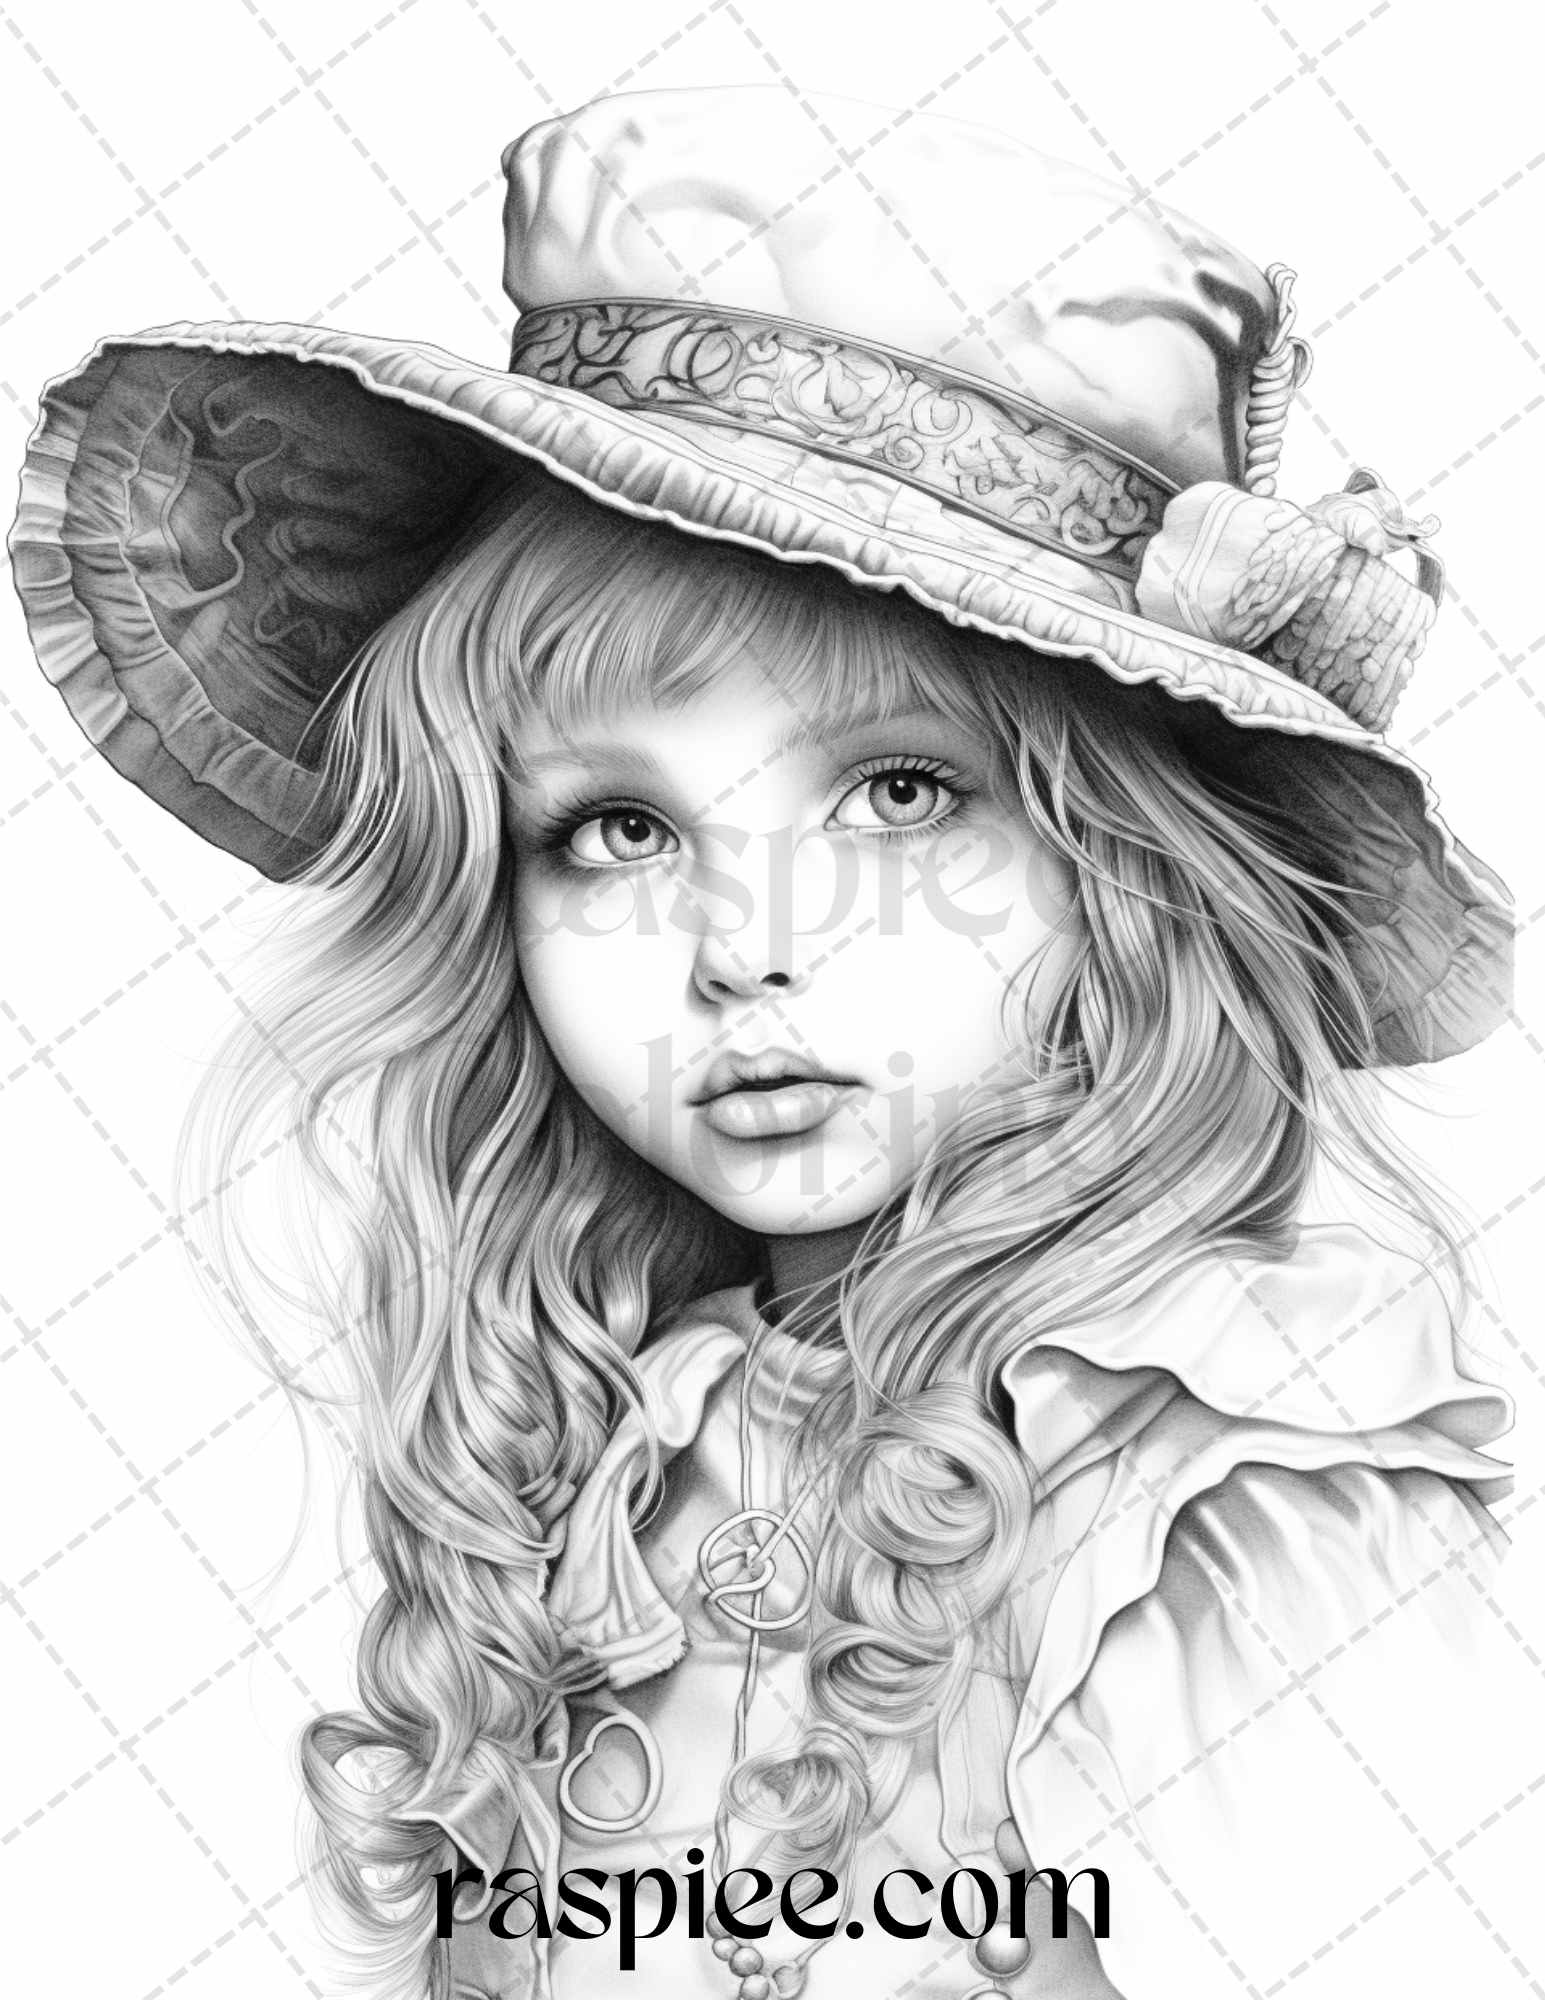 55 Adorable Pirates Grayscale Coloring Pages Printable for Adults, PDF File Instant Download - raspiee